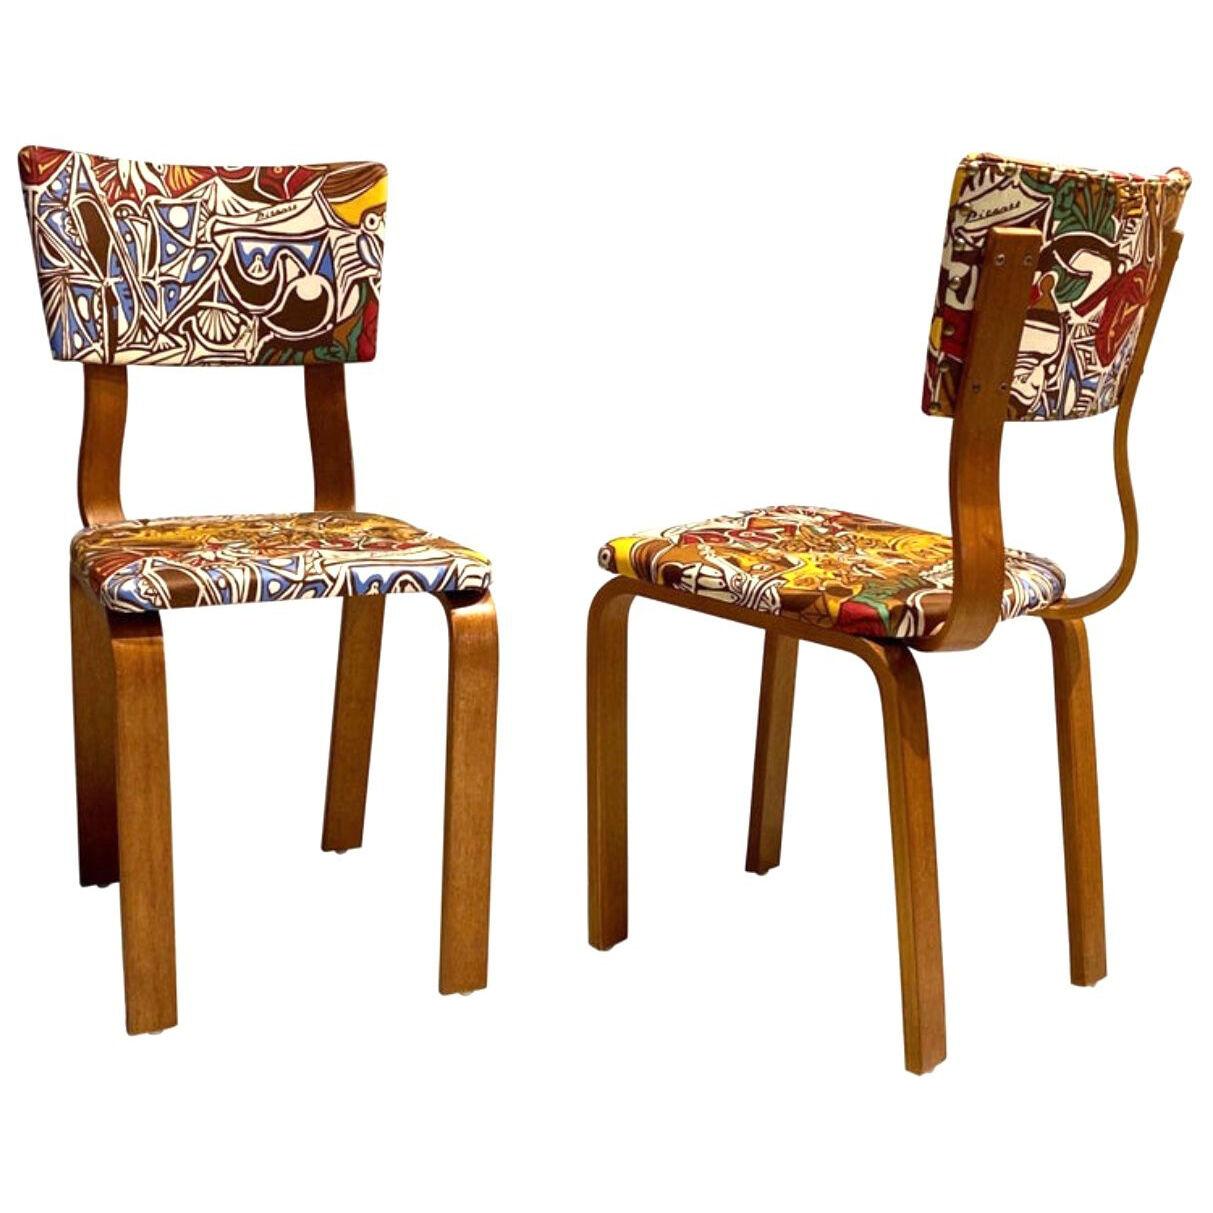 Original 1940s Thonet Bentwood Chairs with Pablo Picasso LTD Edition Fabric